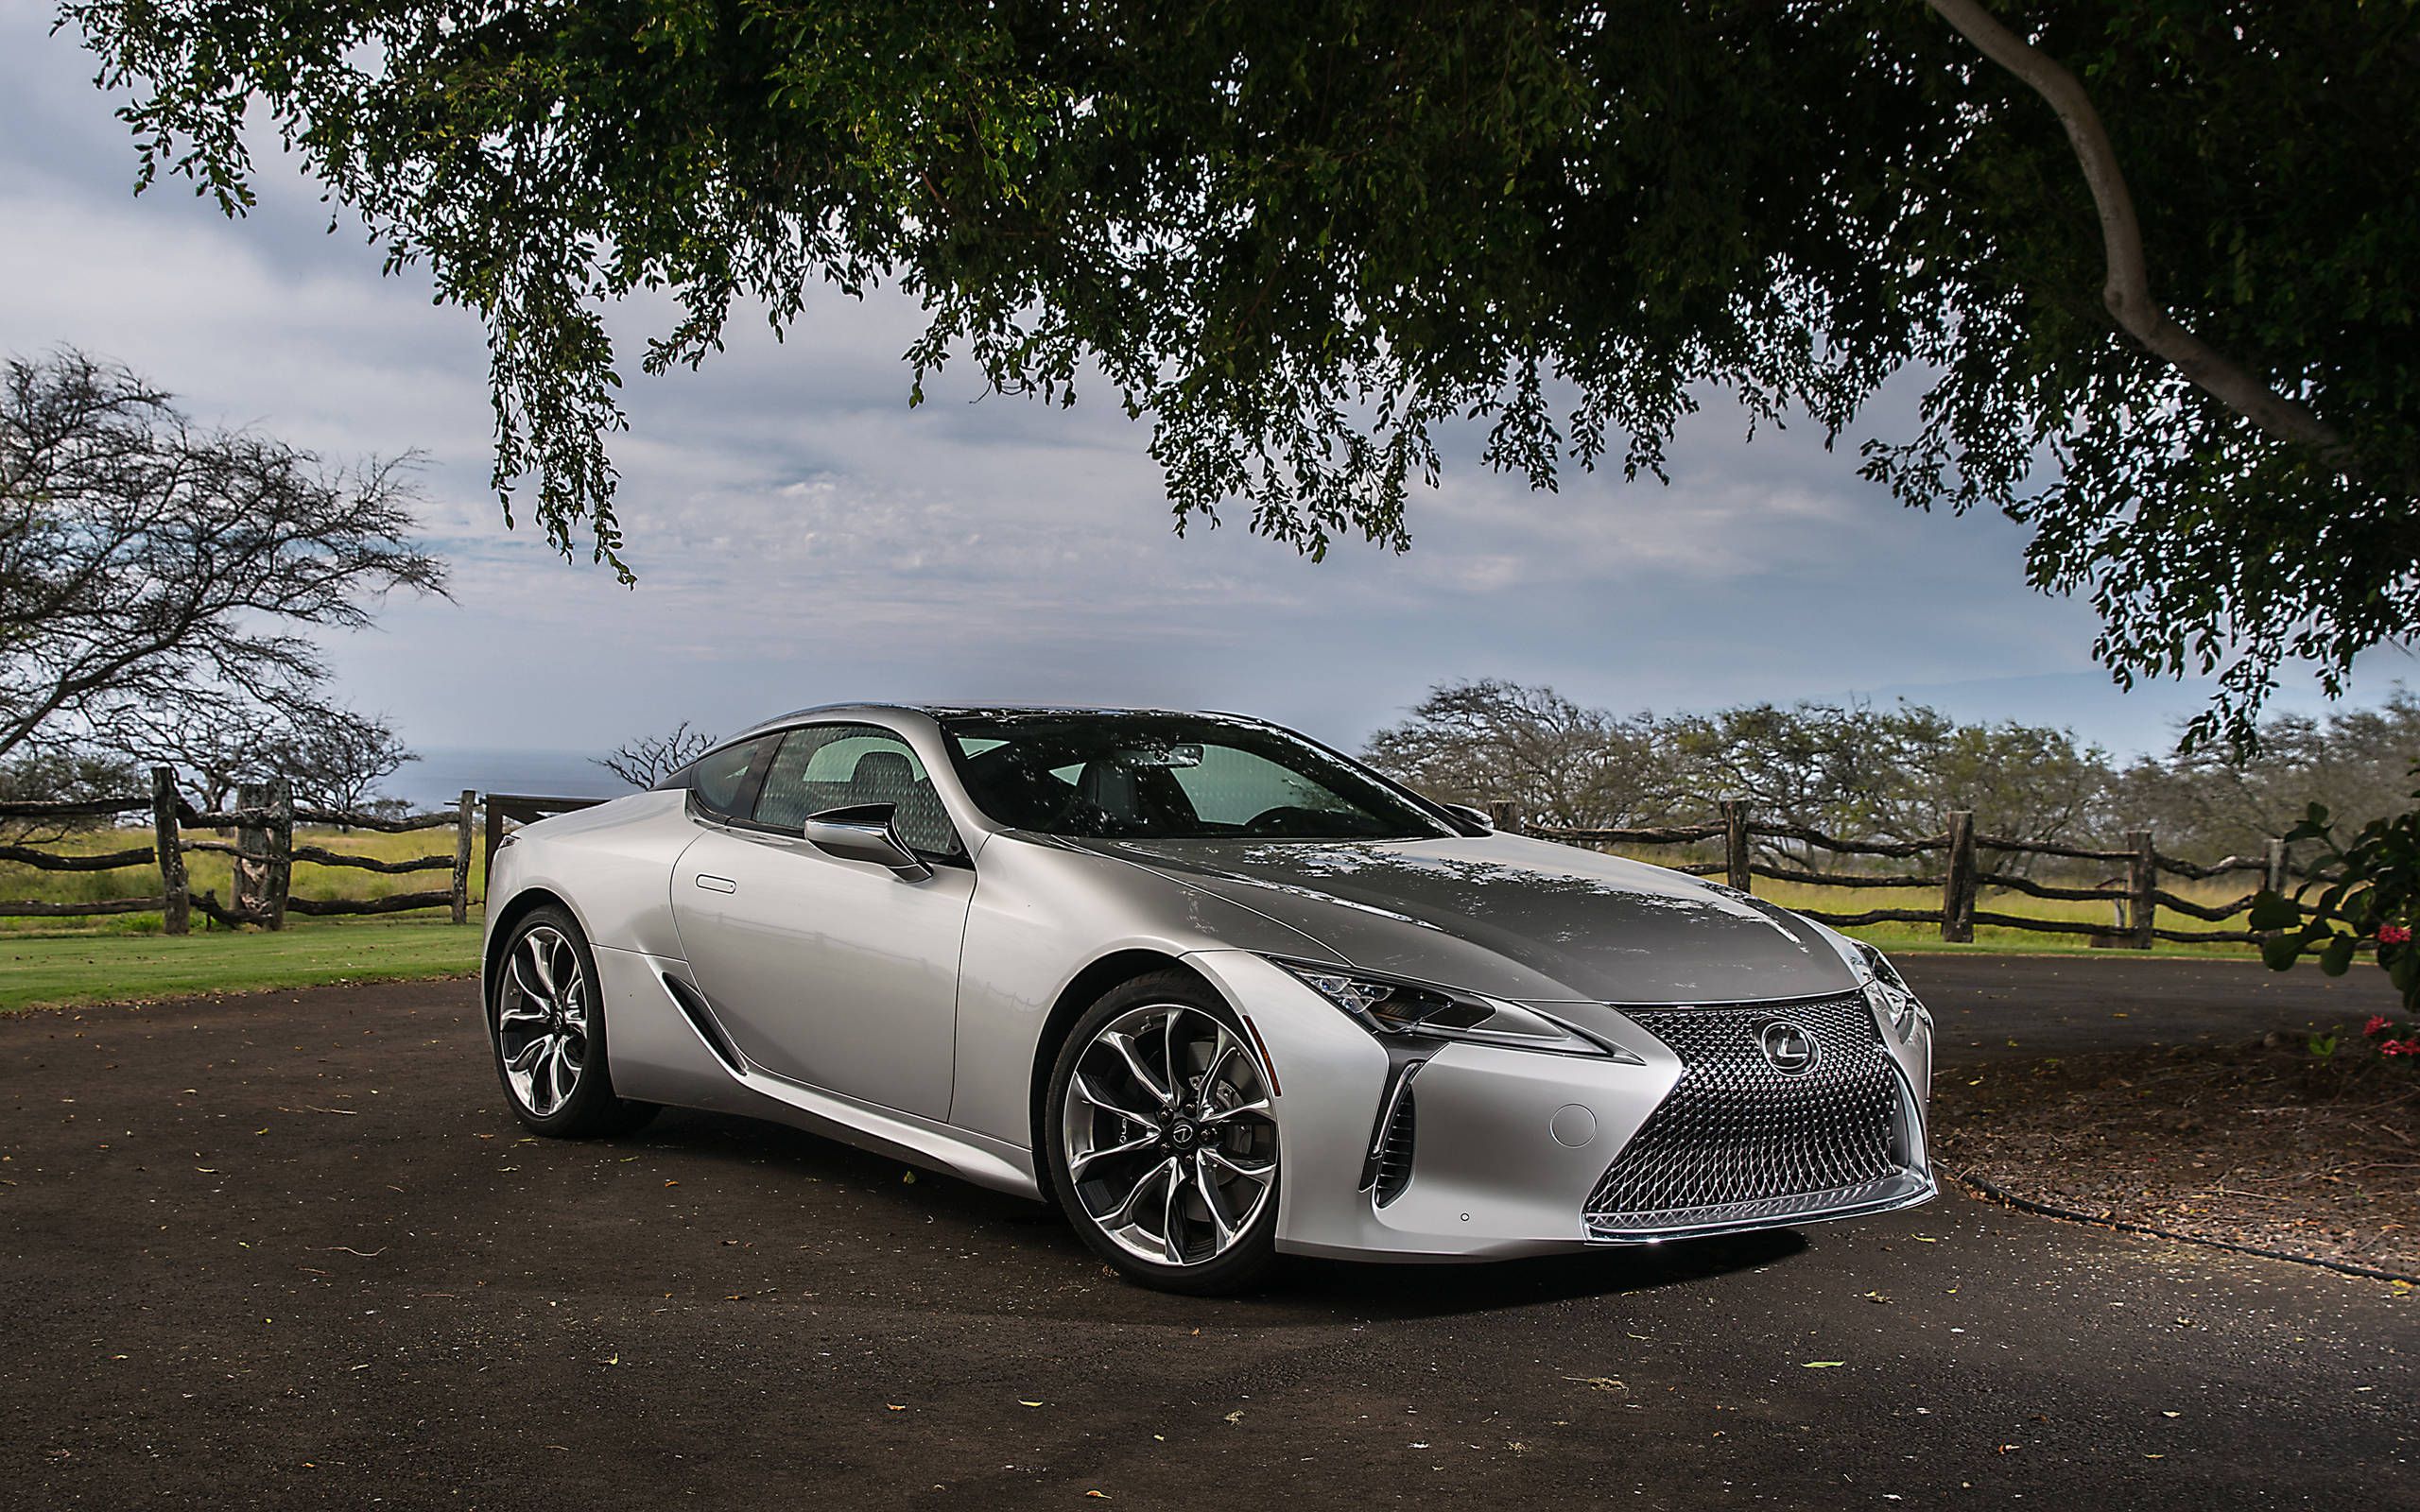 2018 Lexus LC500 review: The return of the personal luxury coupe